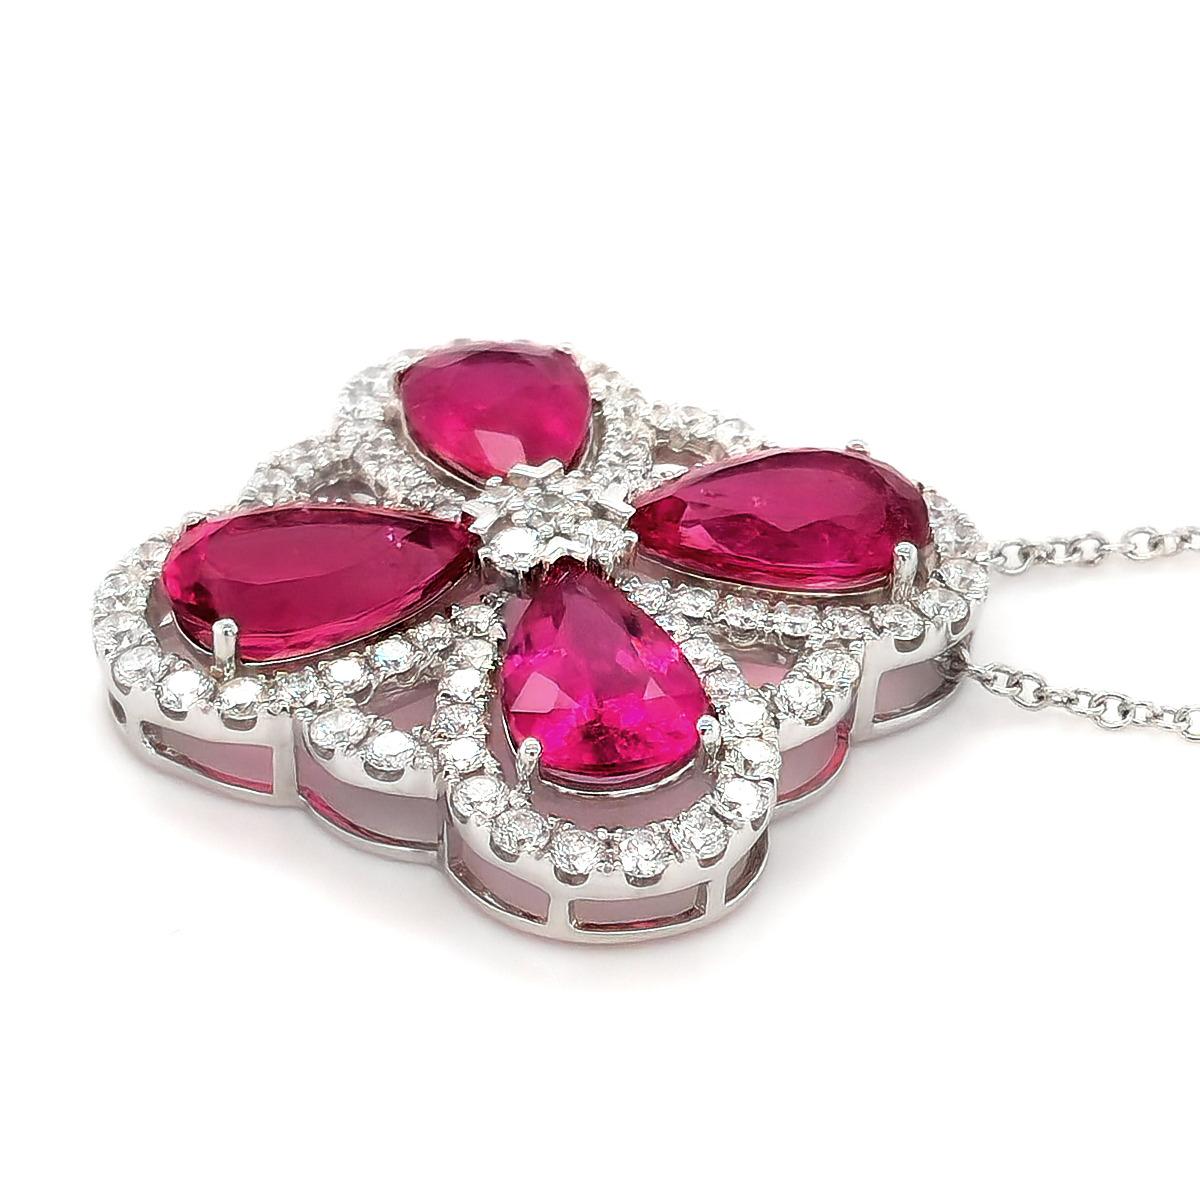 Natural Rubellites 11.22 carats set in 14K White Gold Pendant with 2.10 carats Diamonds

Details
SKU
2271
Metal type
14K White Gold
Metal Weight
8.97
Center Stone
Rubellite
Side Stones
Diamonds
Report
N/A

Center Stone
Quantity
4
Total Weight
11.22